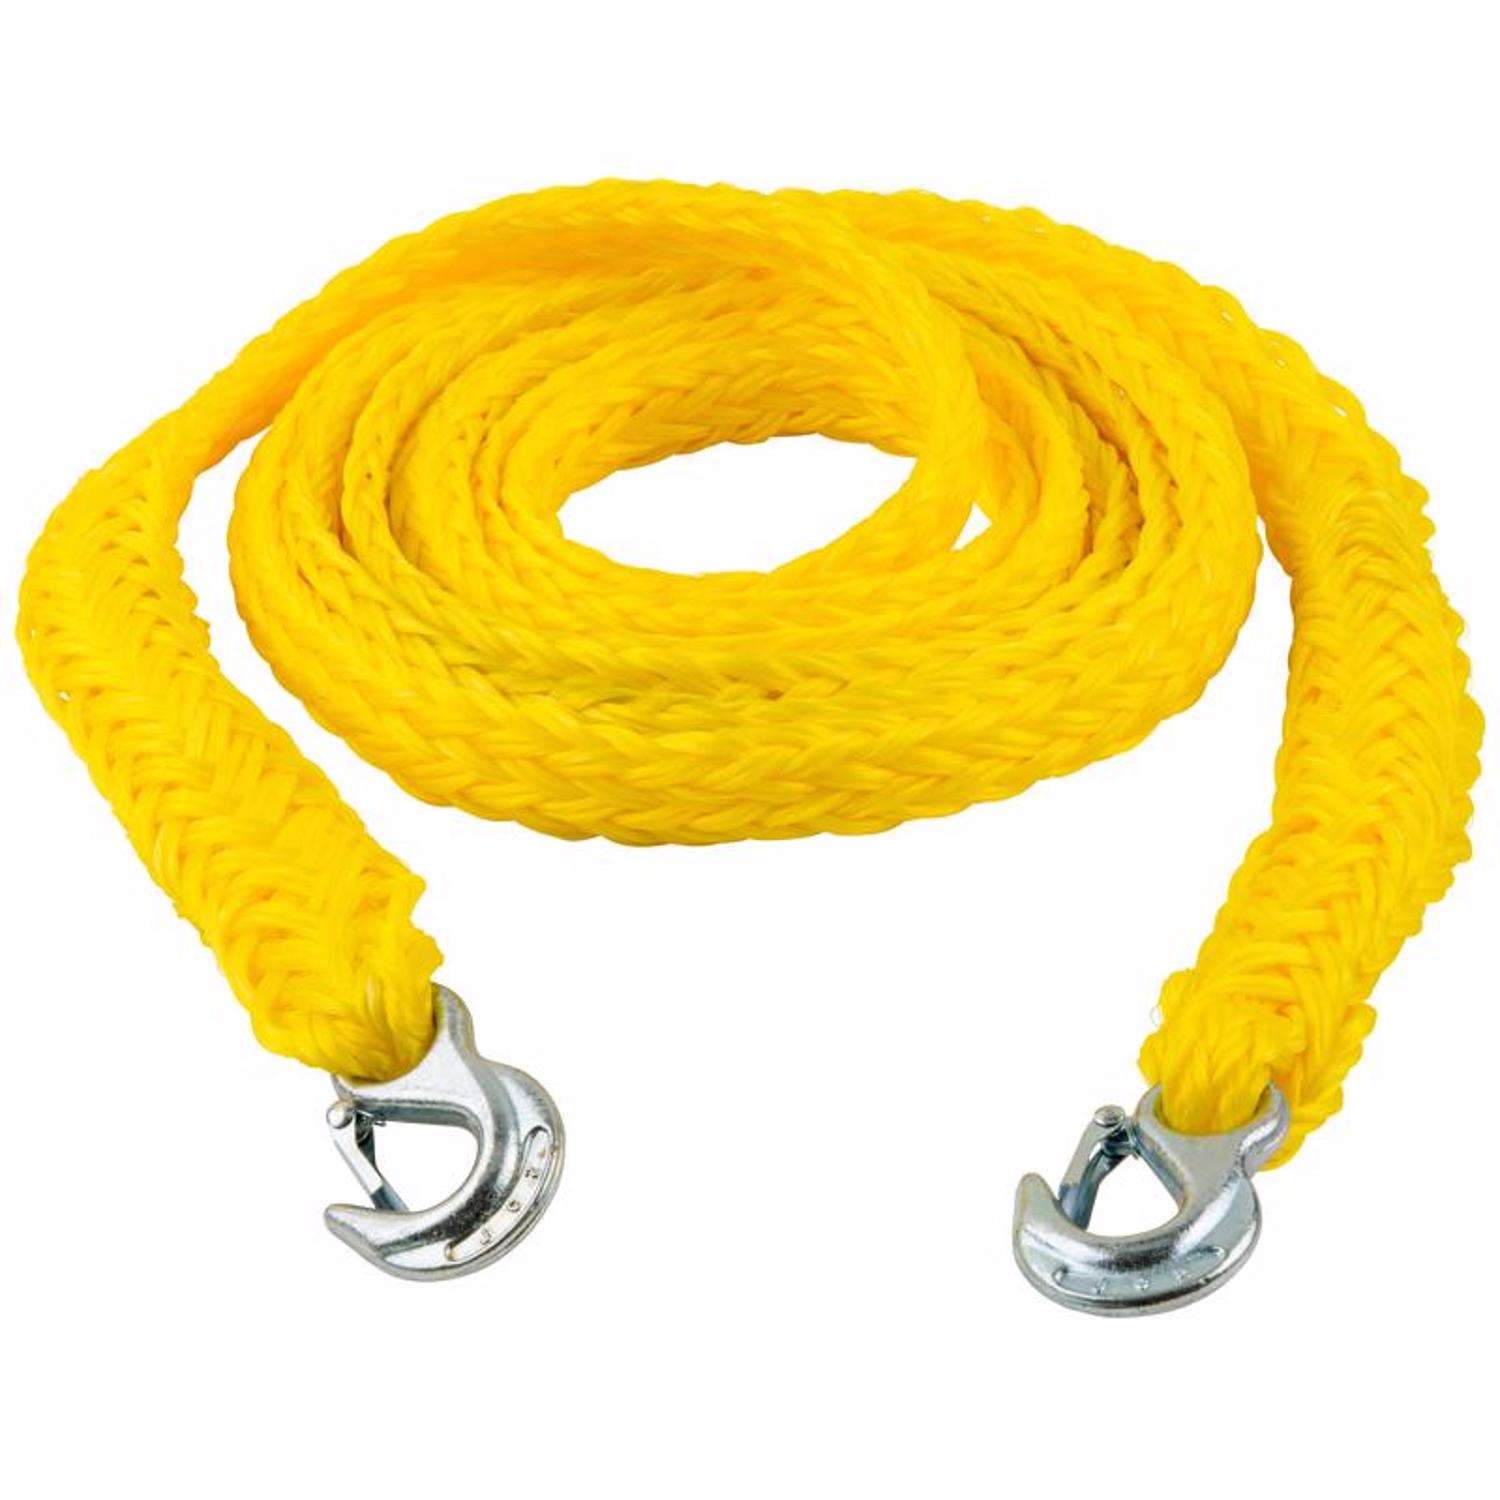 Keeper 89859 Tow Rope, Yellow, 18